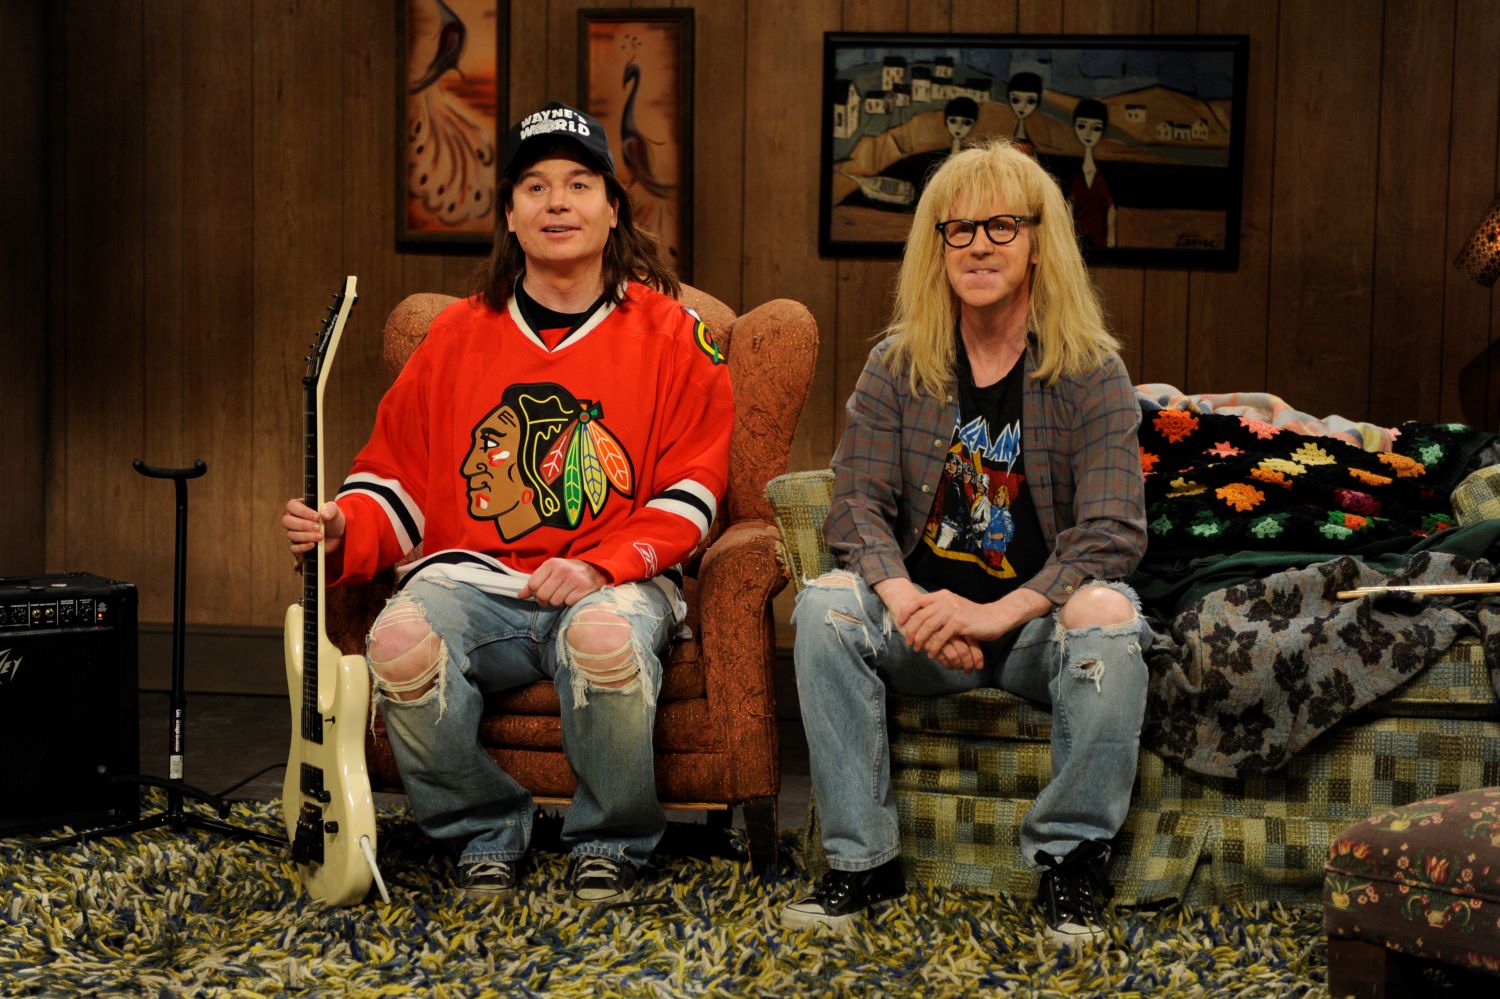 Mike Myers and Dana Carvey in 'Wayne's World' sketch on 'SNL'